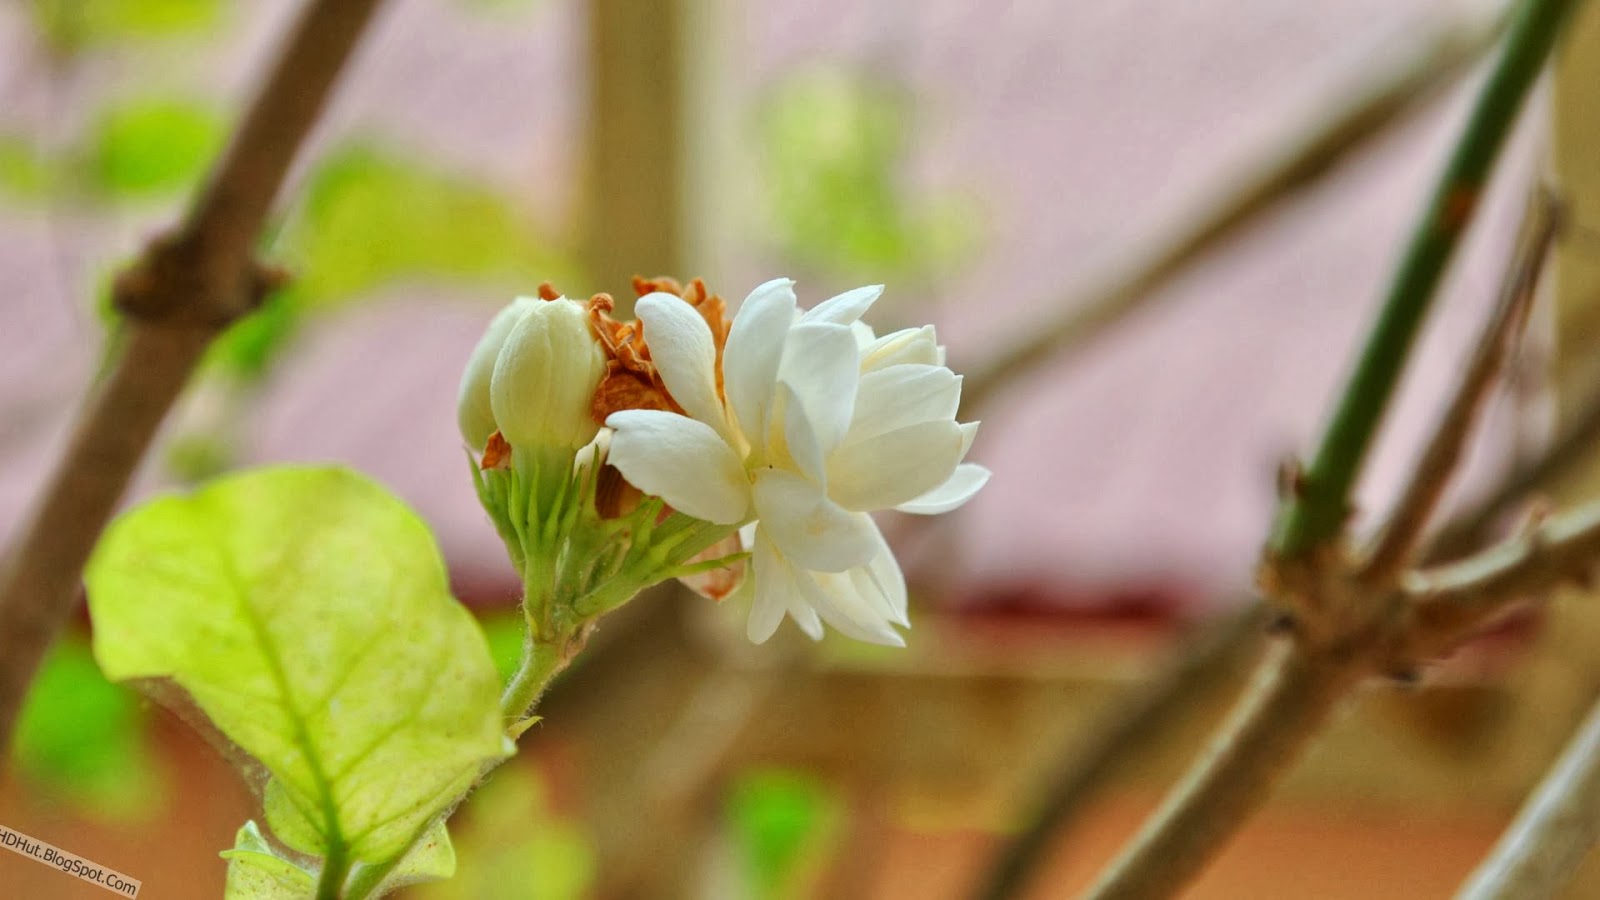 Jasmine Flower Wallpapers In HD - Wallpapers And Pictures